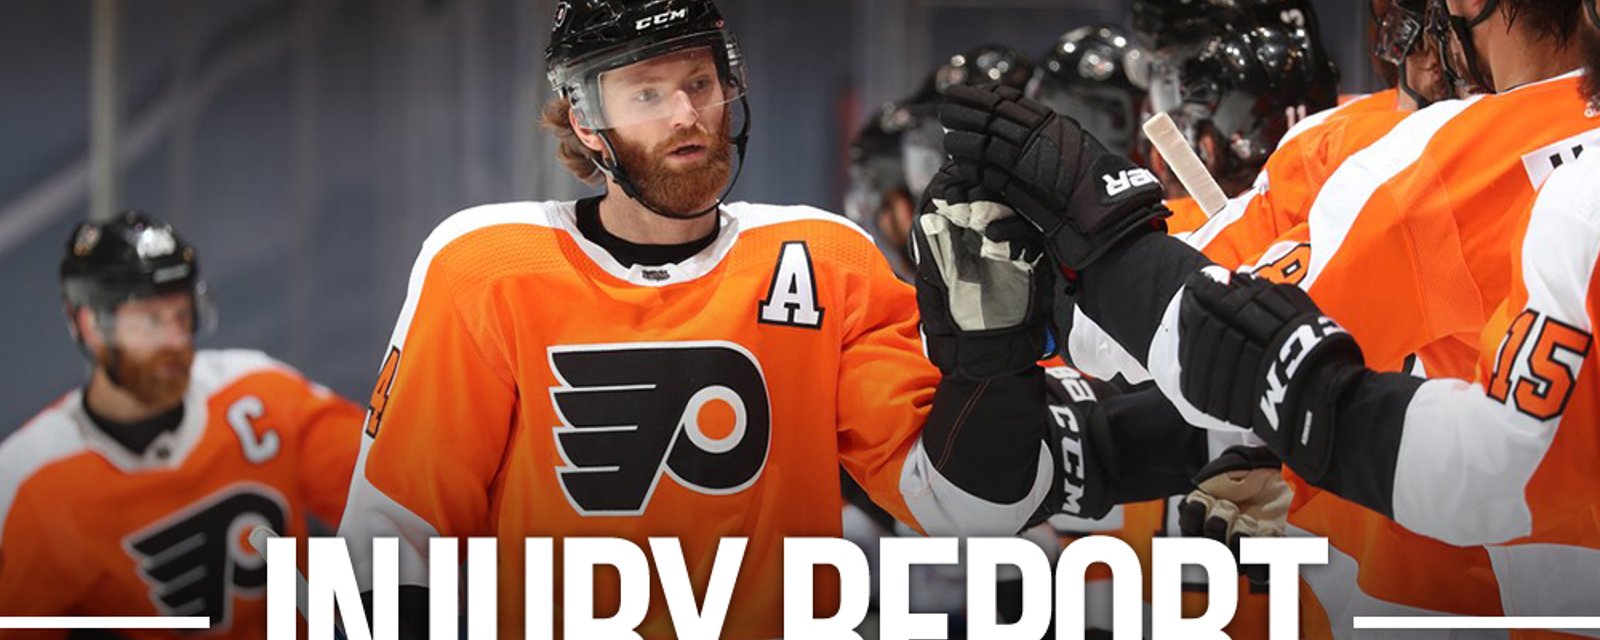 GM Fletcher provides an update on Couturier following brutal injury